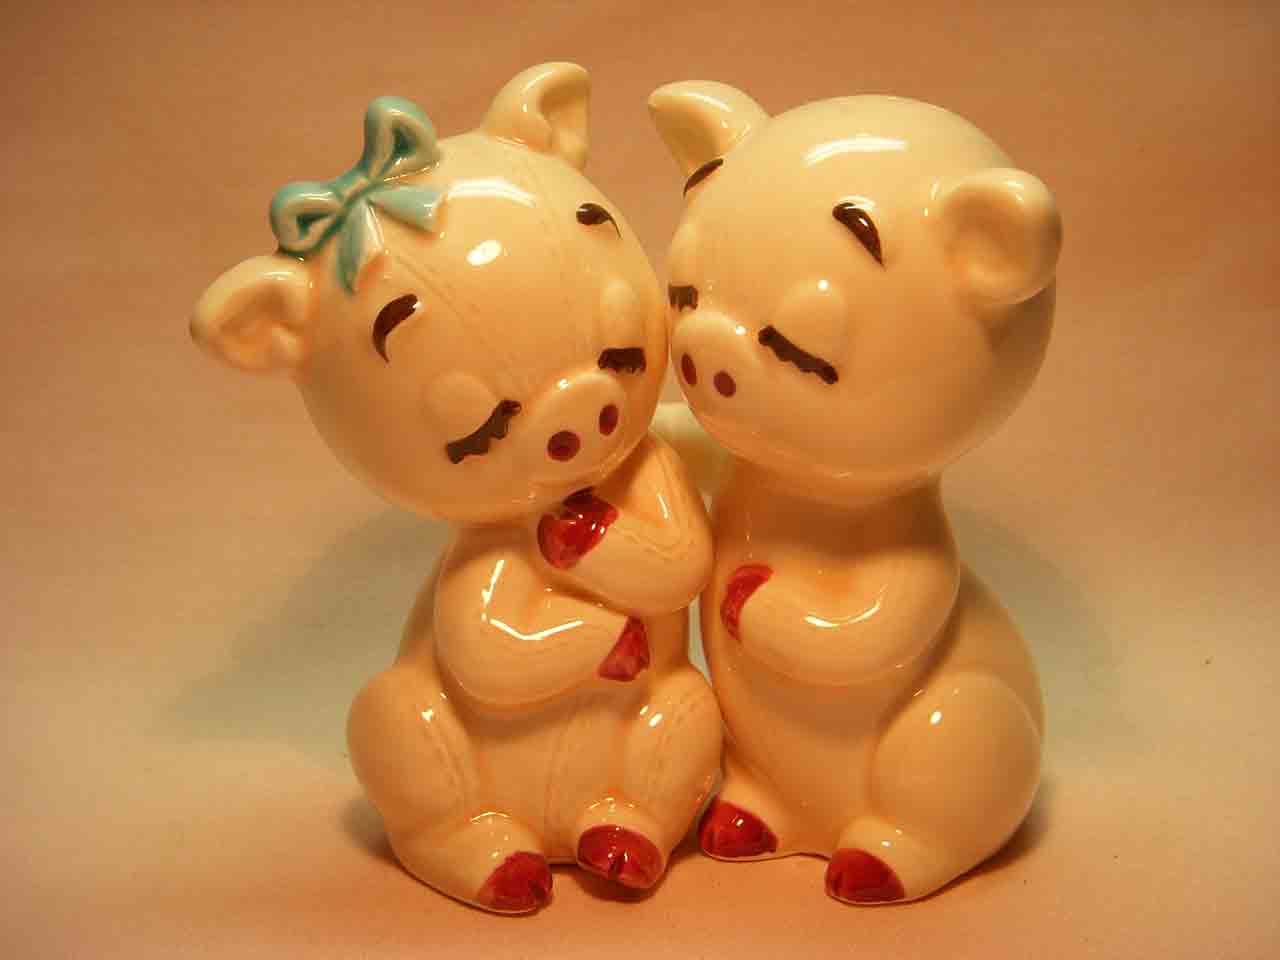 Animal Couples - Boy with Arm Around Girl salt and pepper shakers - pigs